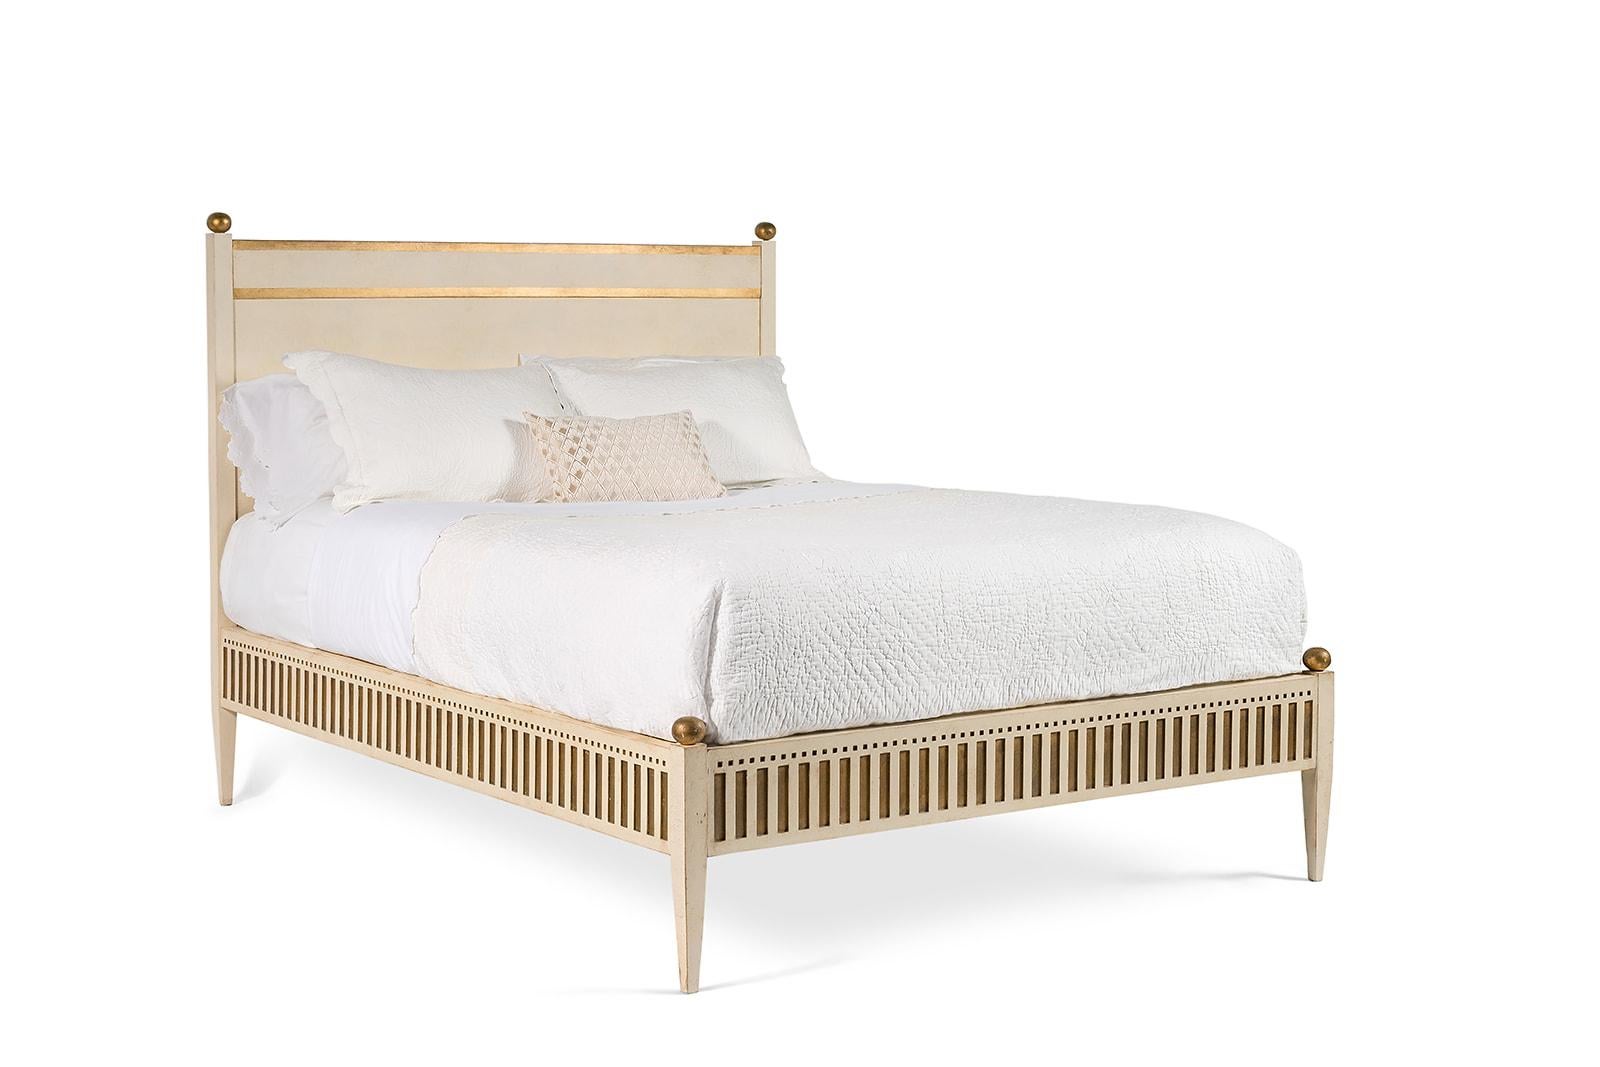 We are pleased to introduce you to our Veronese Bed. 
Among our beds, the Veronese Bed surely has more modern lines that makes it the most versatile in use. In fact, we have seen it used both in traditional and in more modern properties, turning out